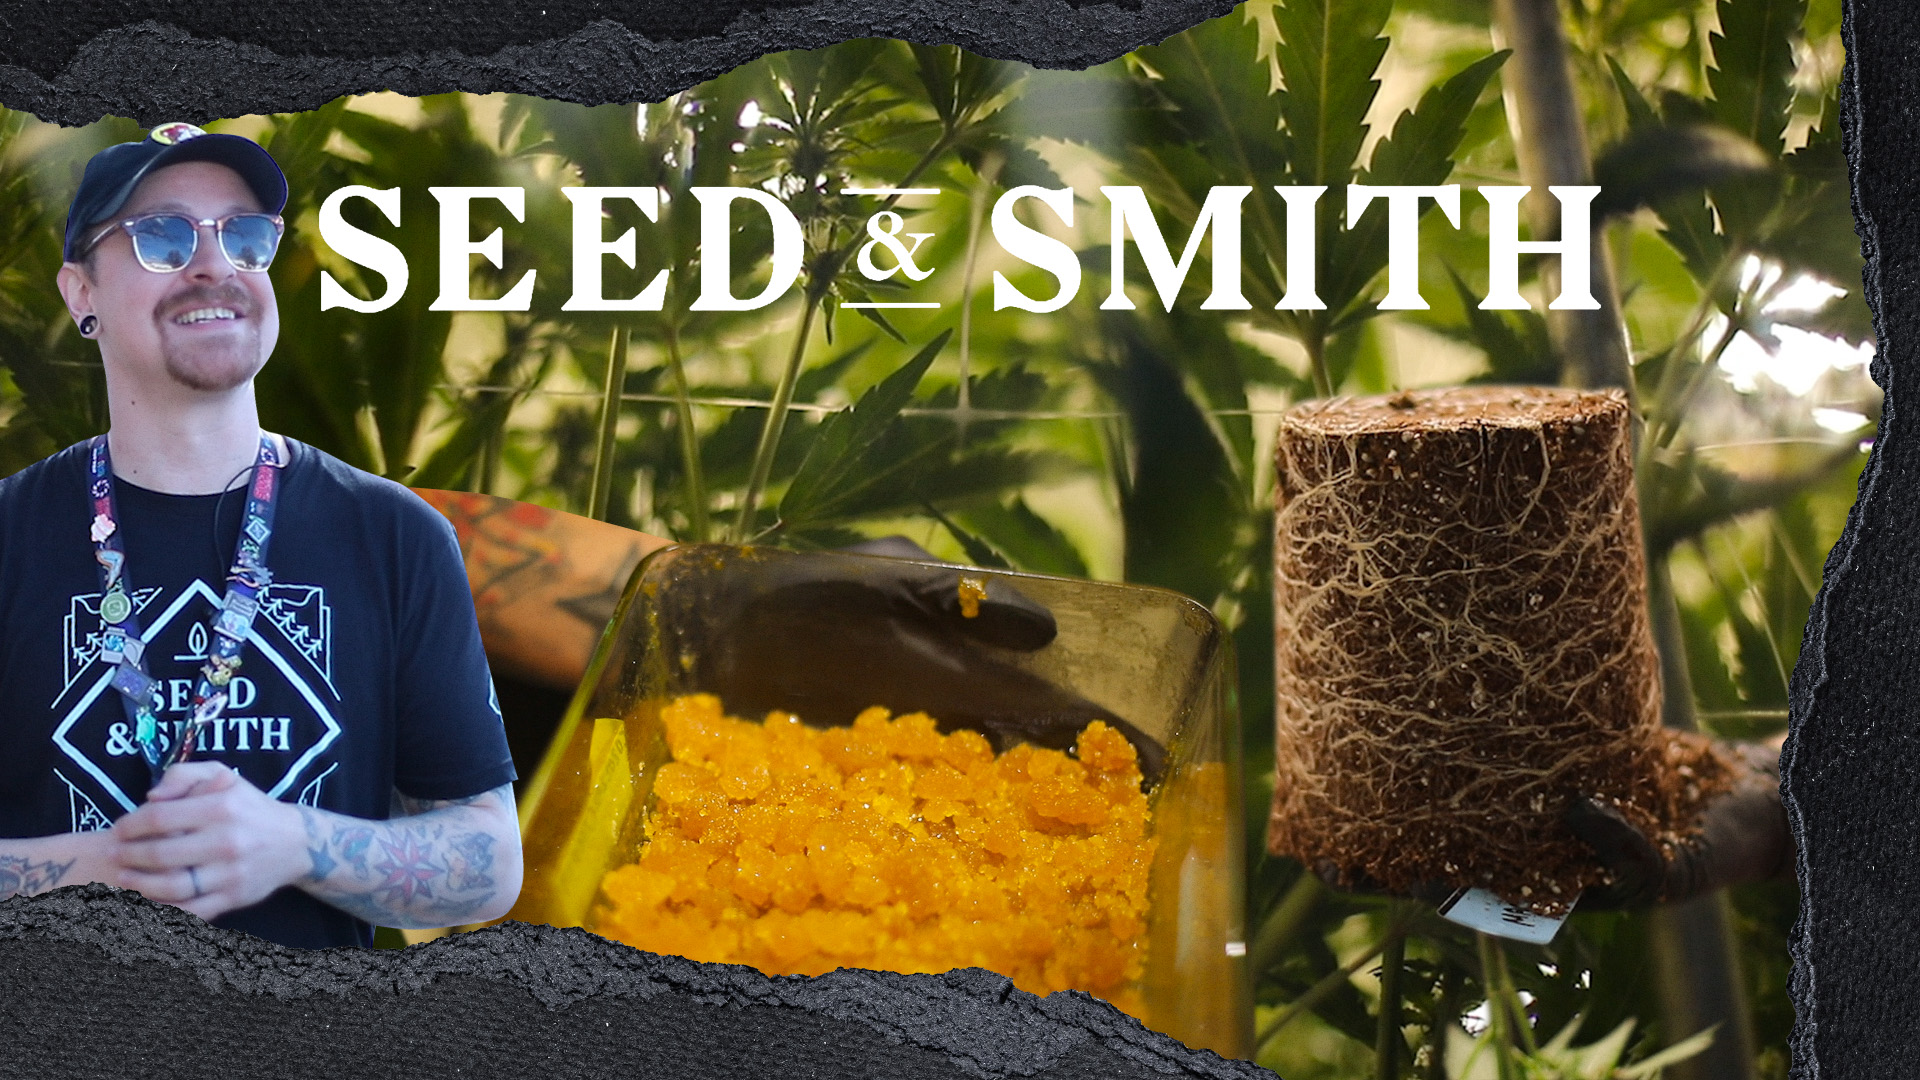 Behind-The-Scenes of a Cannabis Grow Facility with Seed & Smith